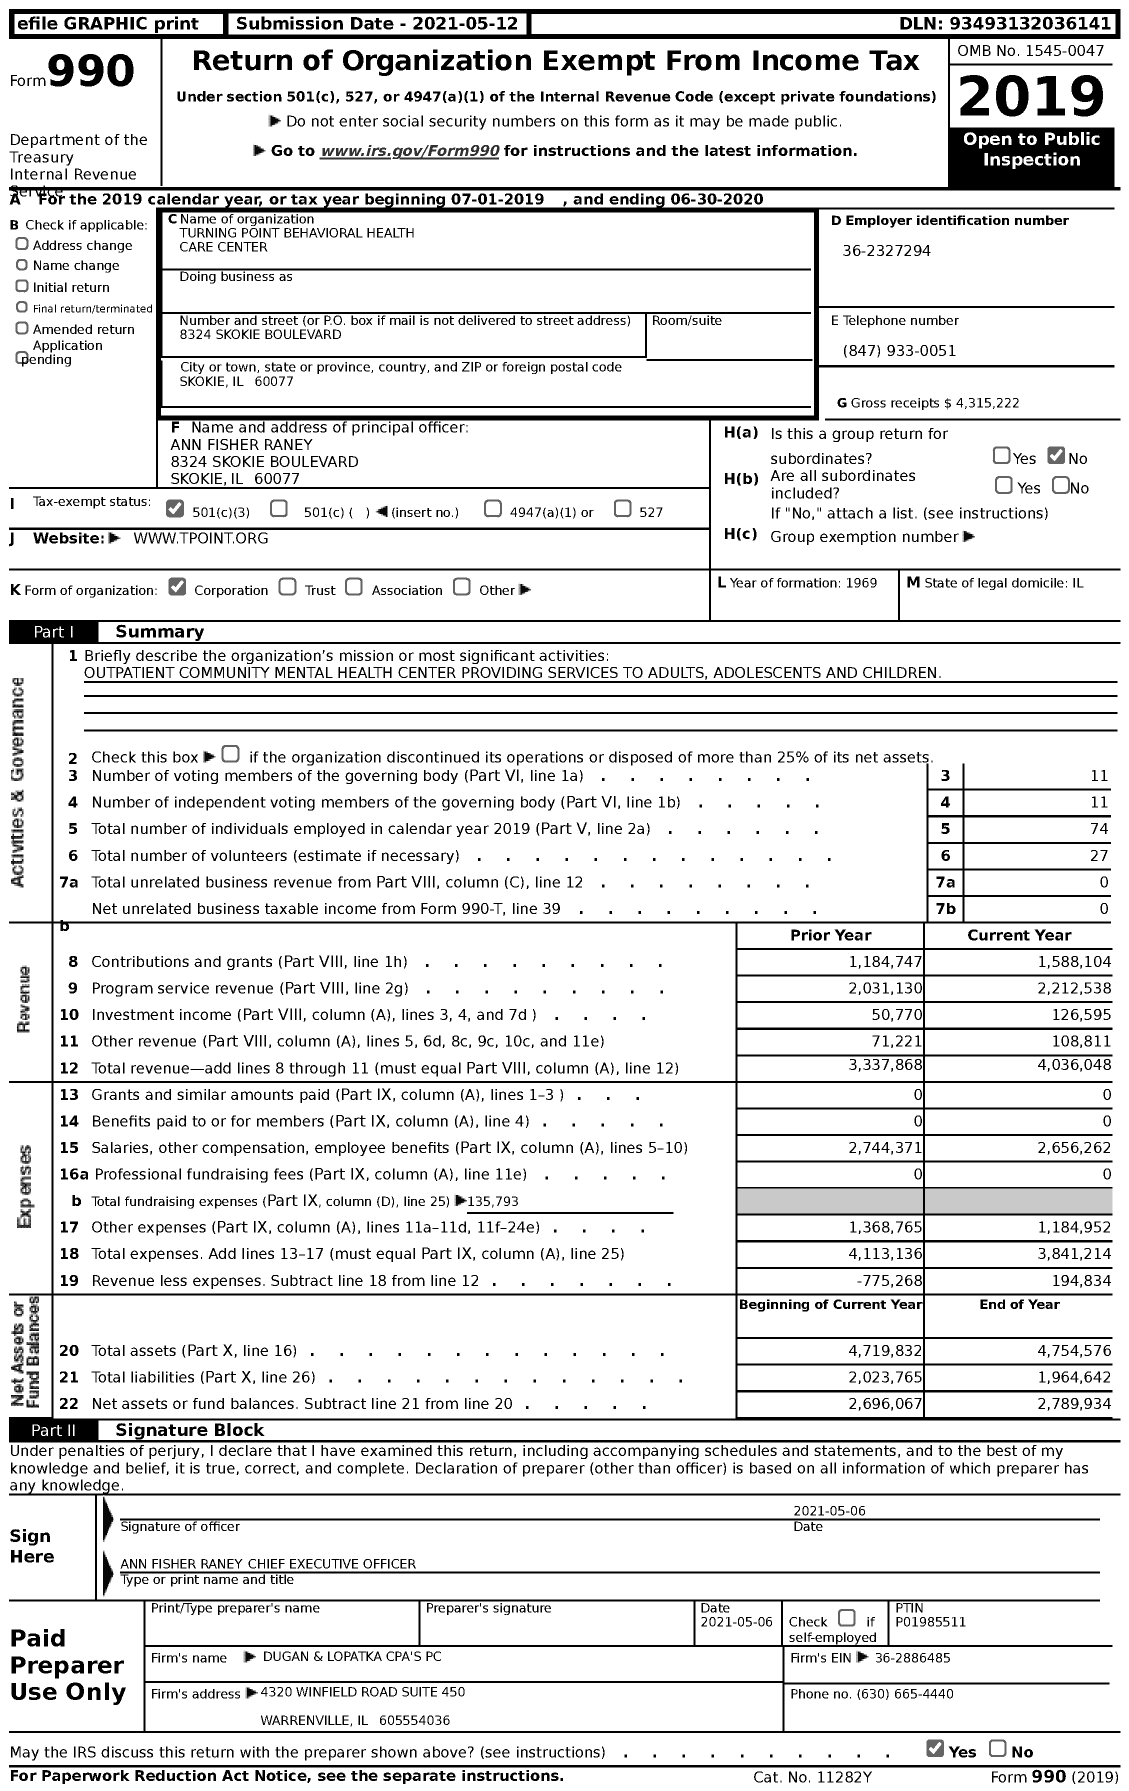 Image of first page of 2019 Form 990 for Turning Point Behavioral Health Care Center